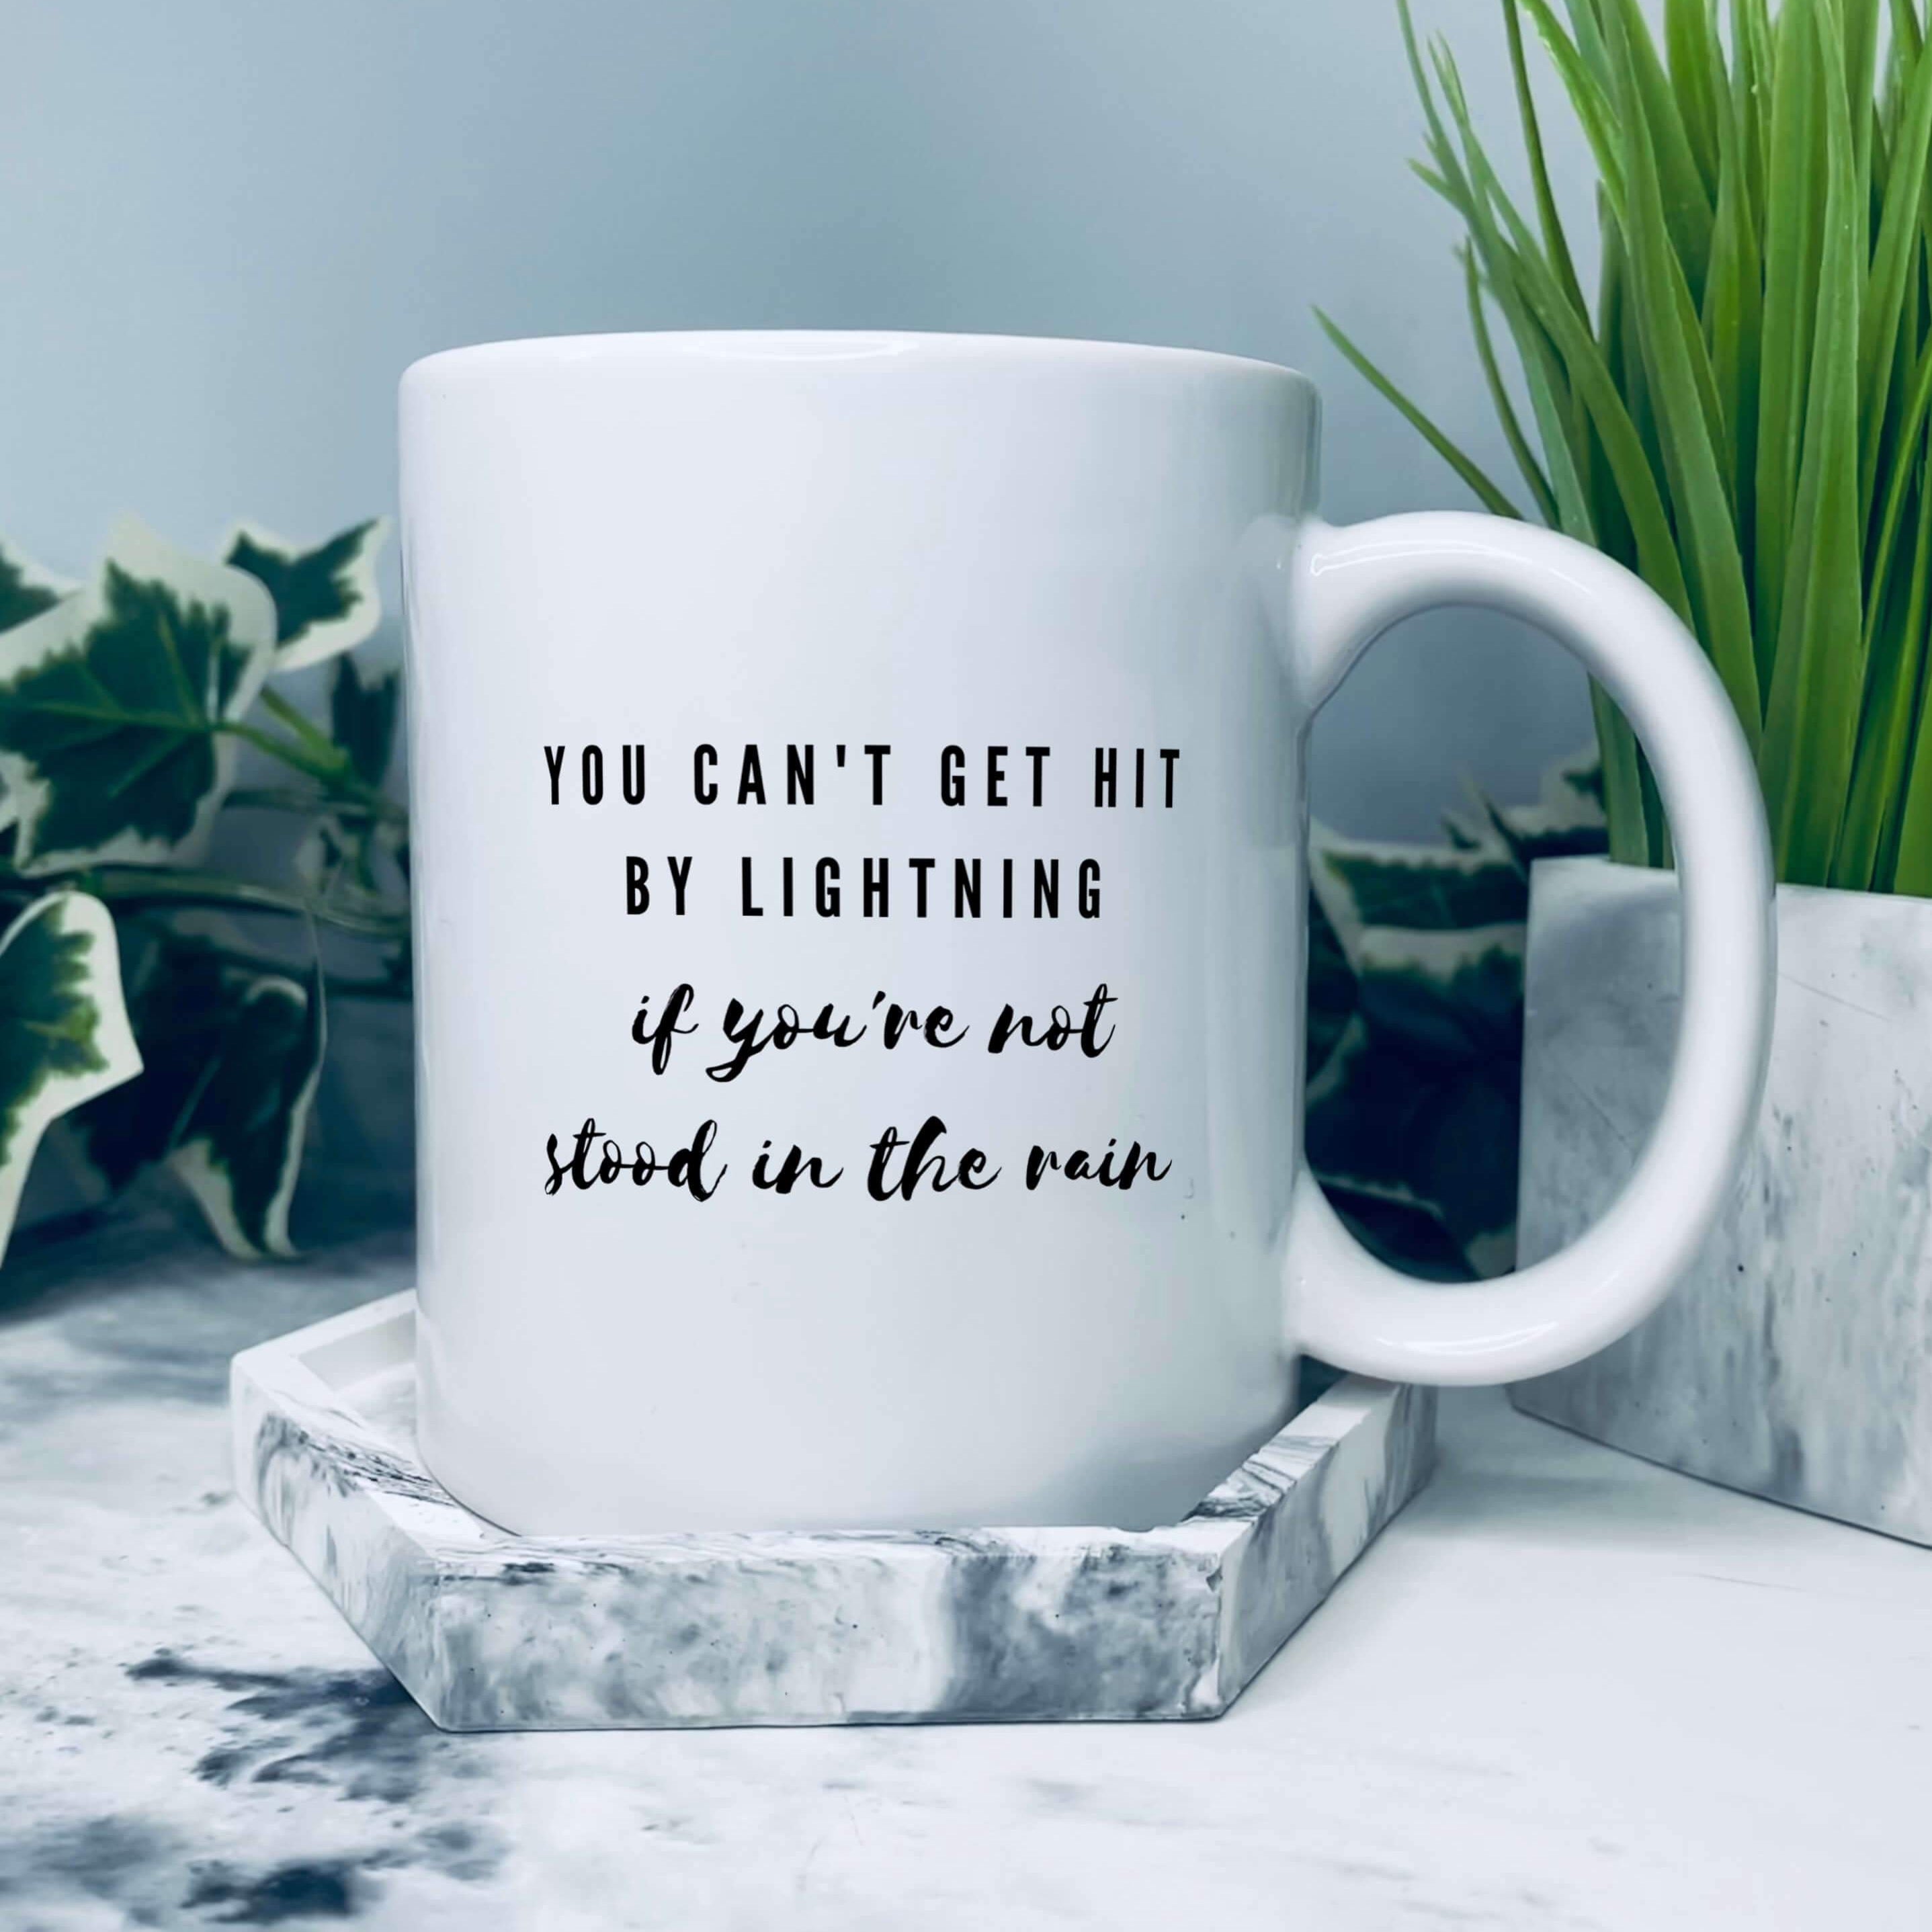 Mug that says: You can't get hit by lightning if you're not stood in the rain